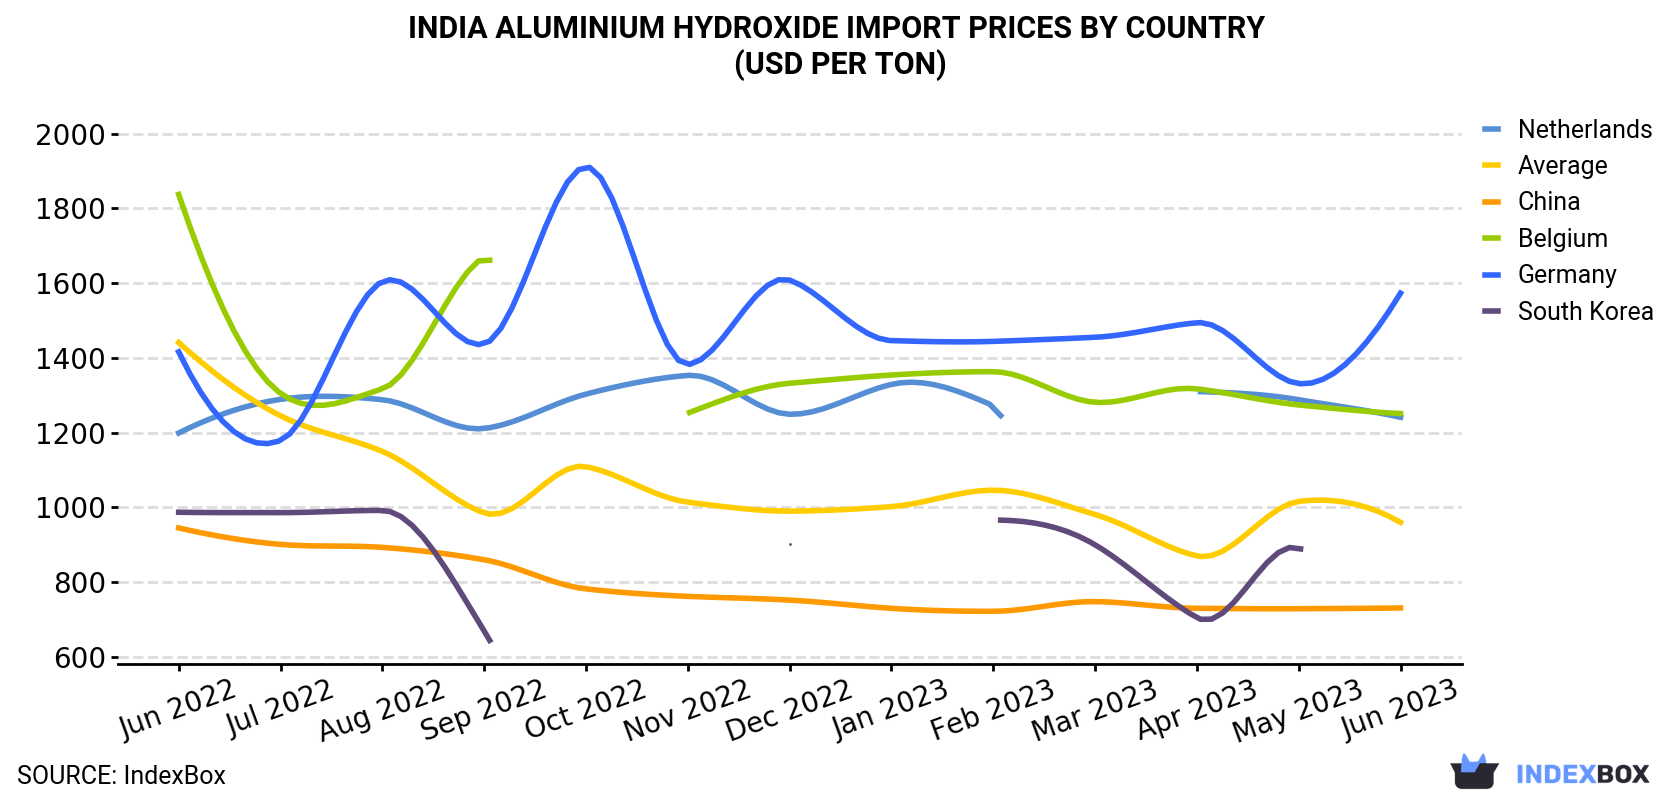 India Aluminium Hydroxide Import Prices By Country (USD Per Ton)